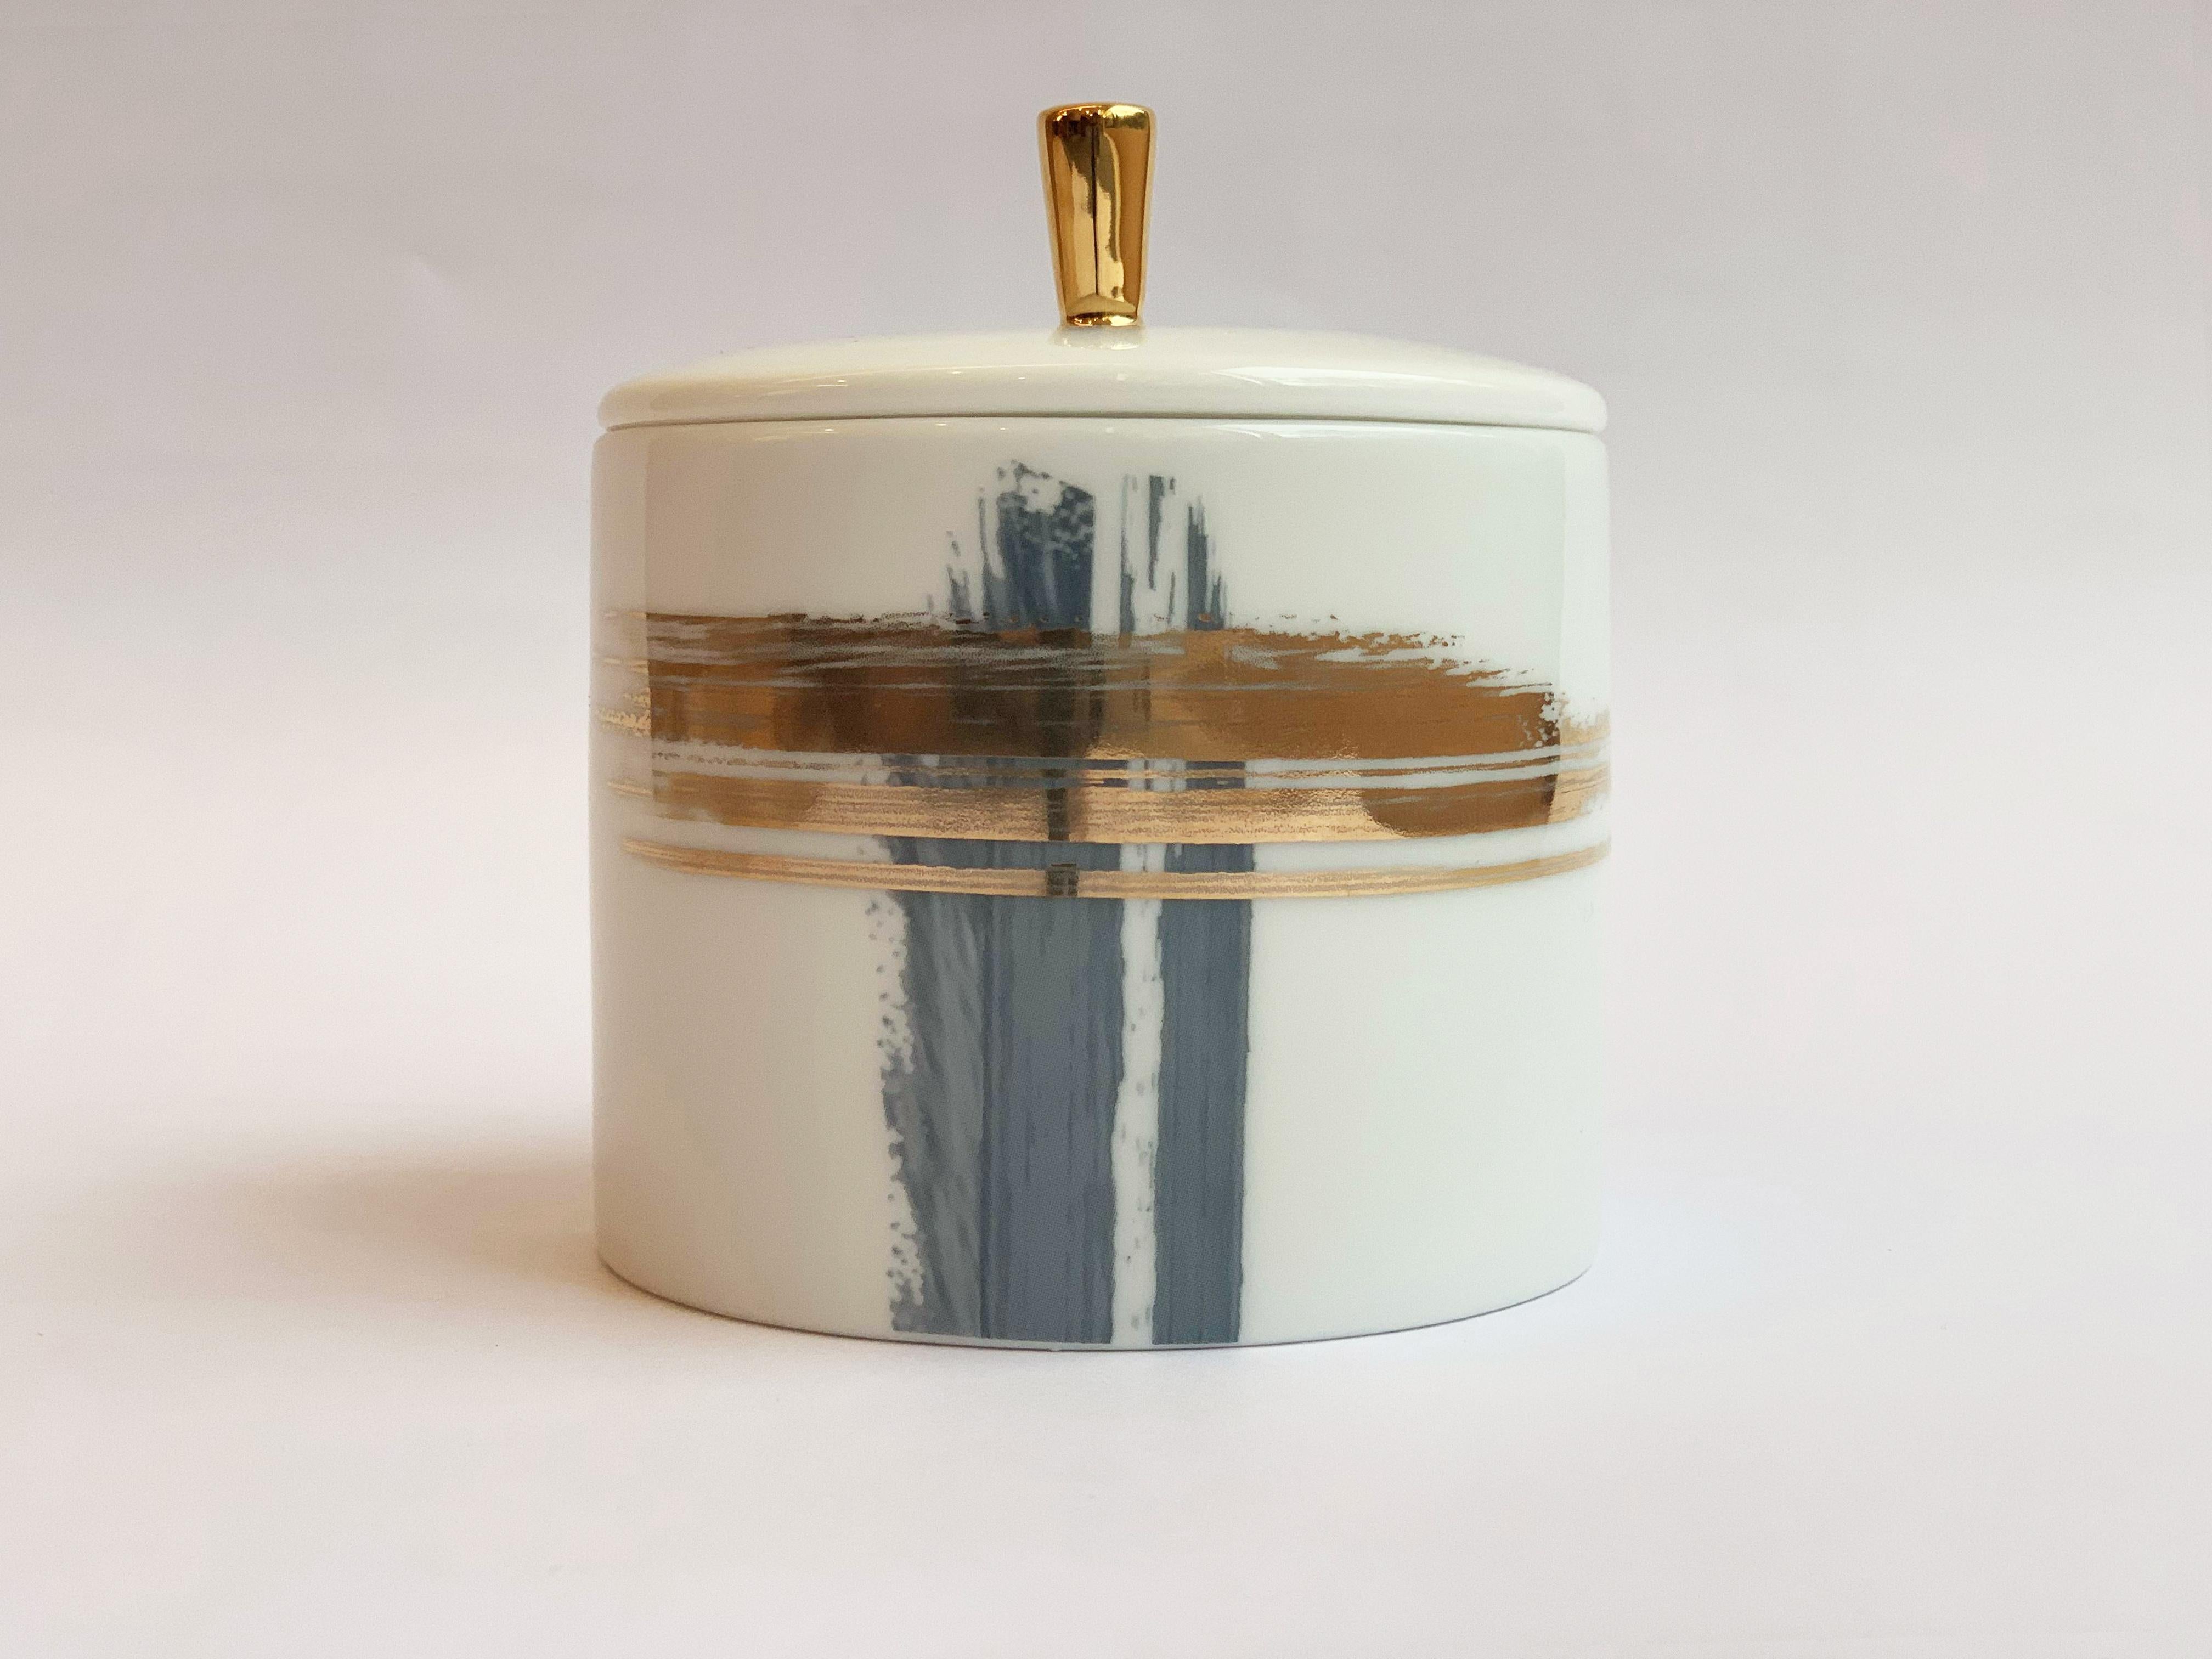 Larger quantities available upon request, with 8 weeks production time.

Description: Cylindrical box with lid (2 pieces)
Color: Blue and gold
Size: 8.5Ø x 7H cm, 80 ml
Material: Porcelain and gold
Collection: Artisan Brush